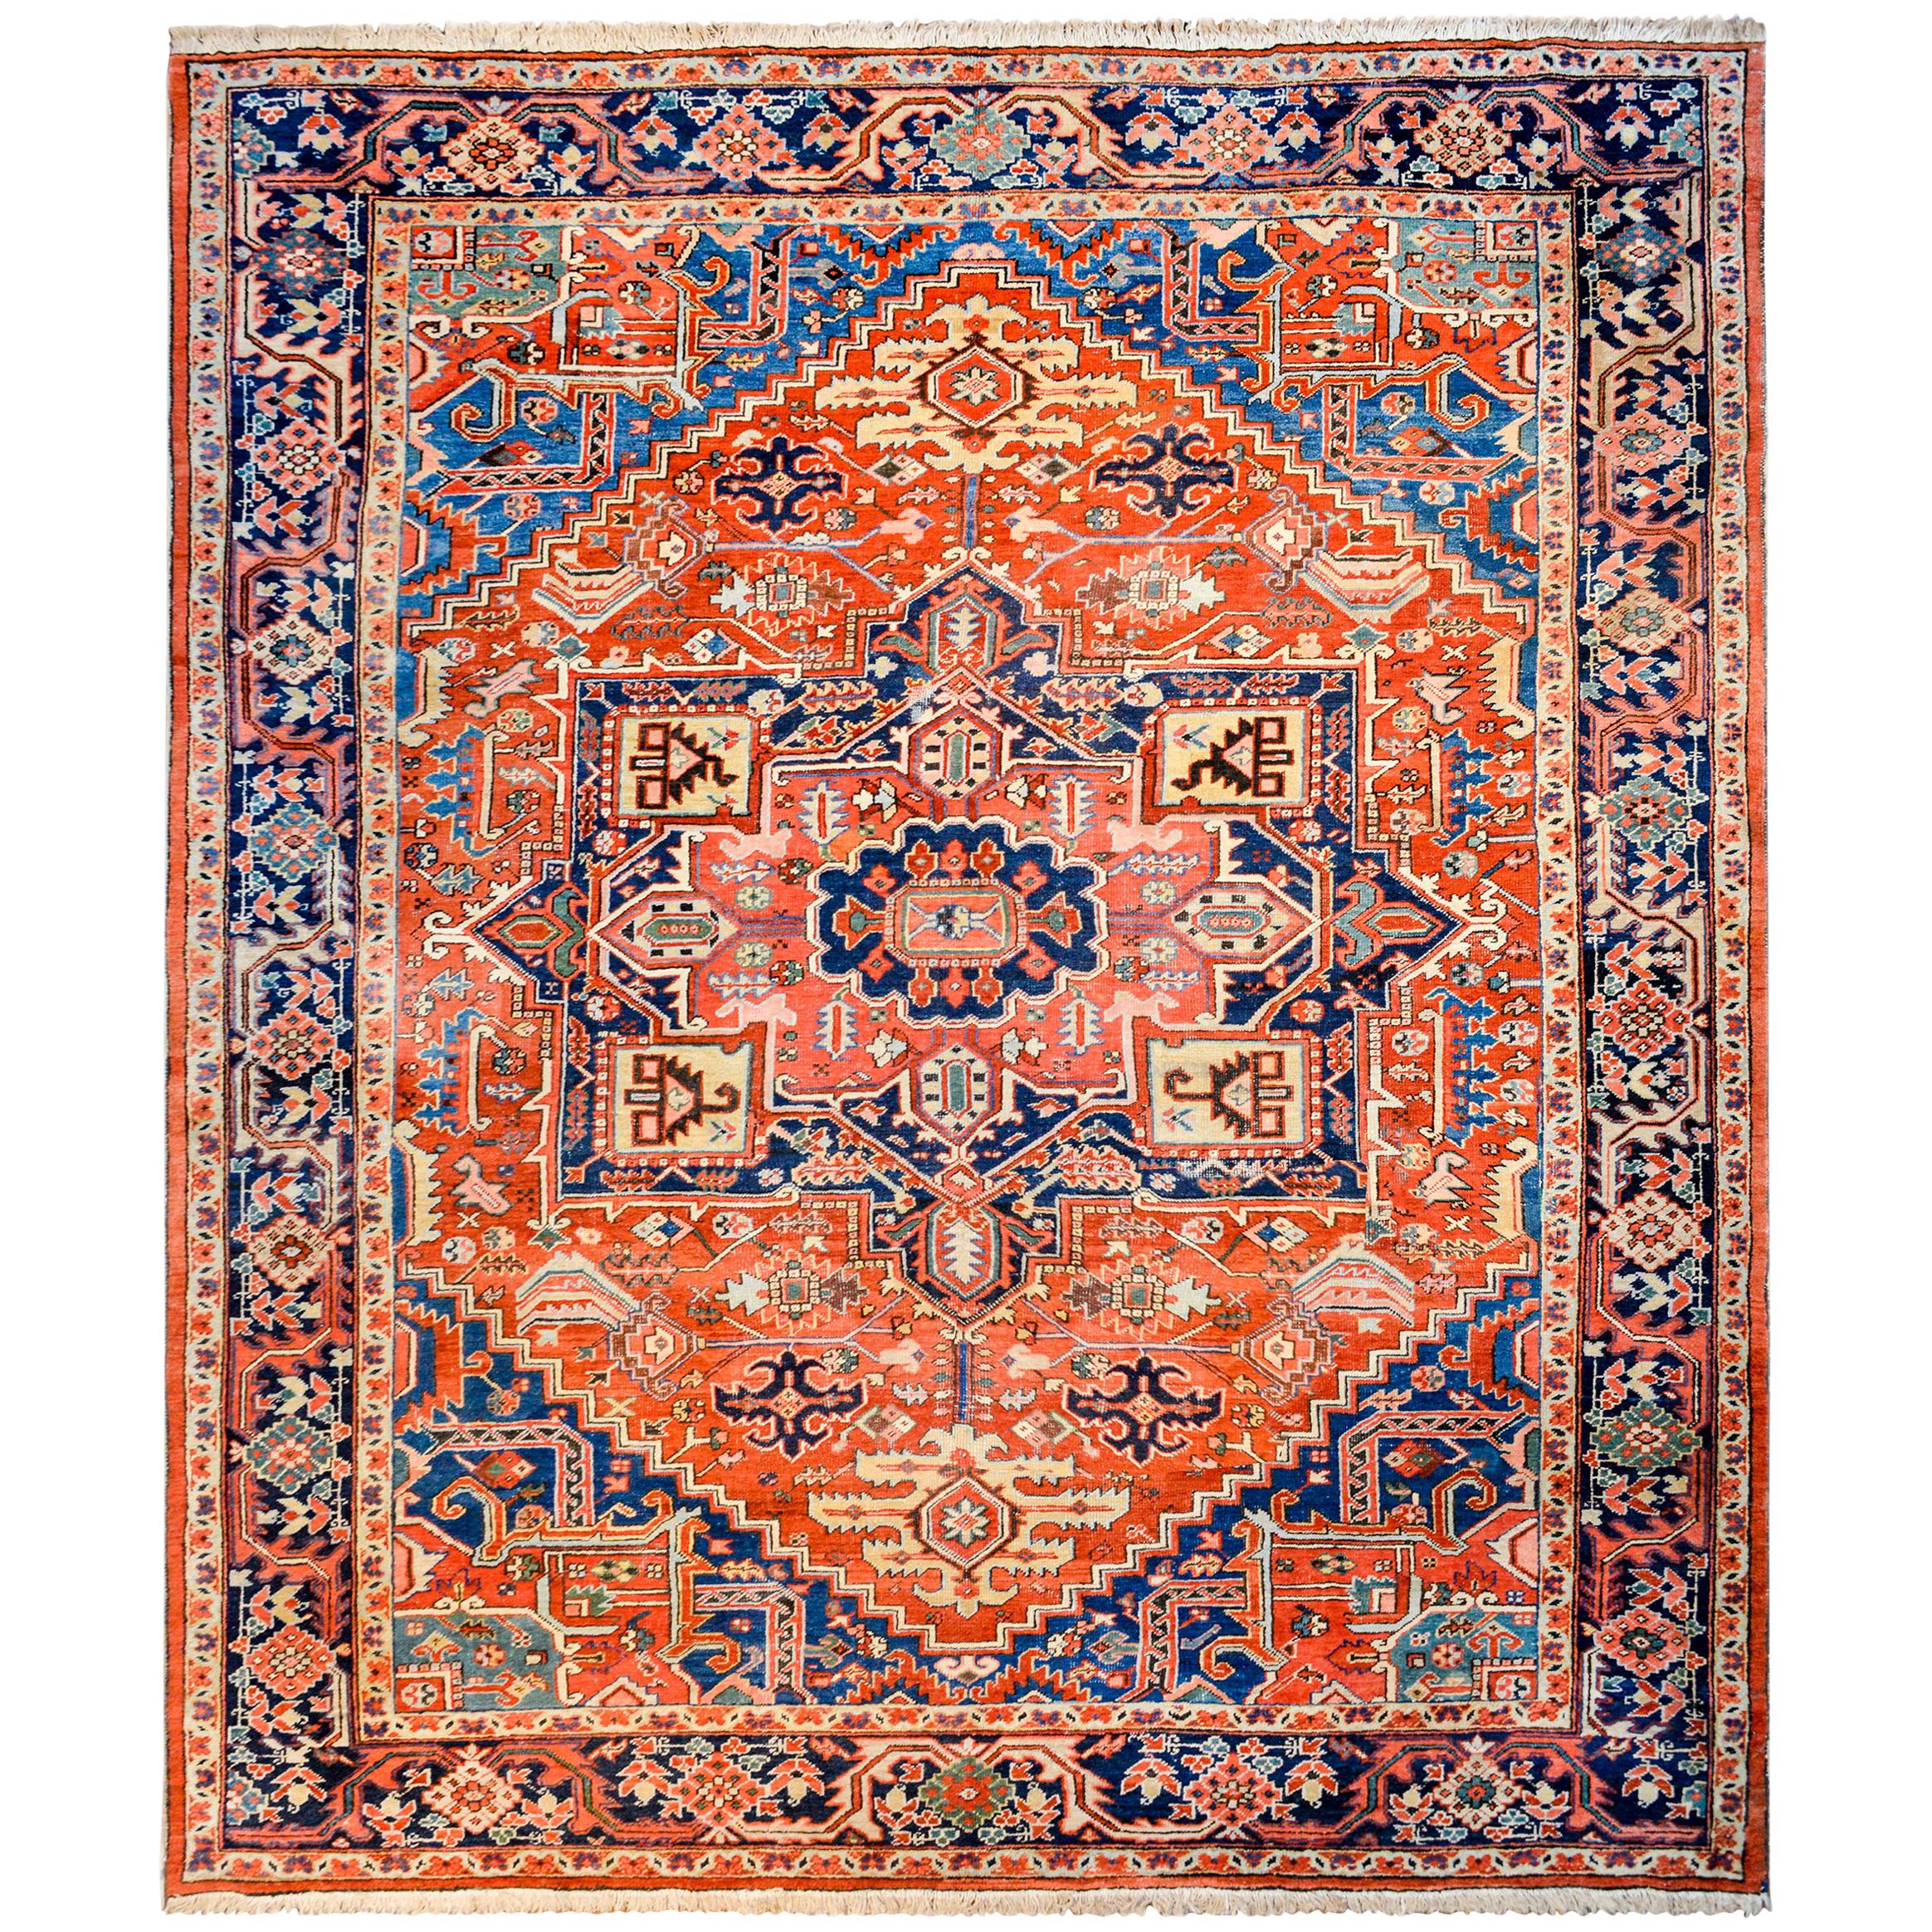 Exciting Early 20th Century Heriz Rug